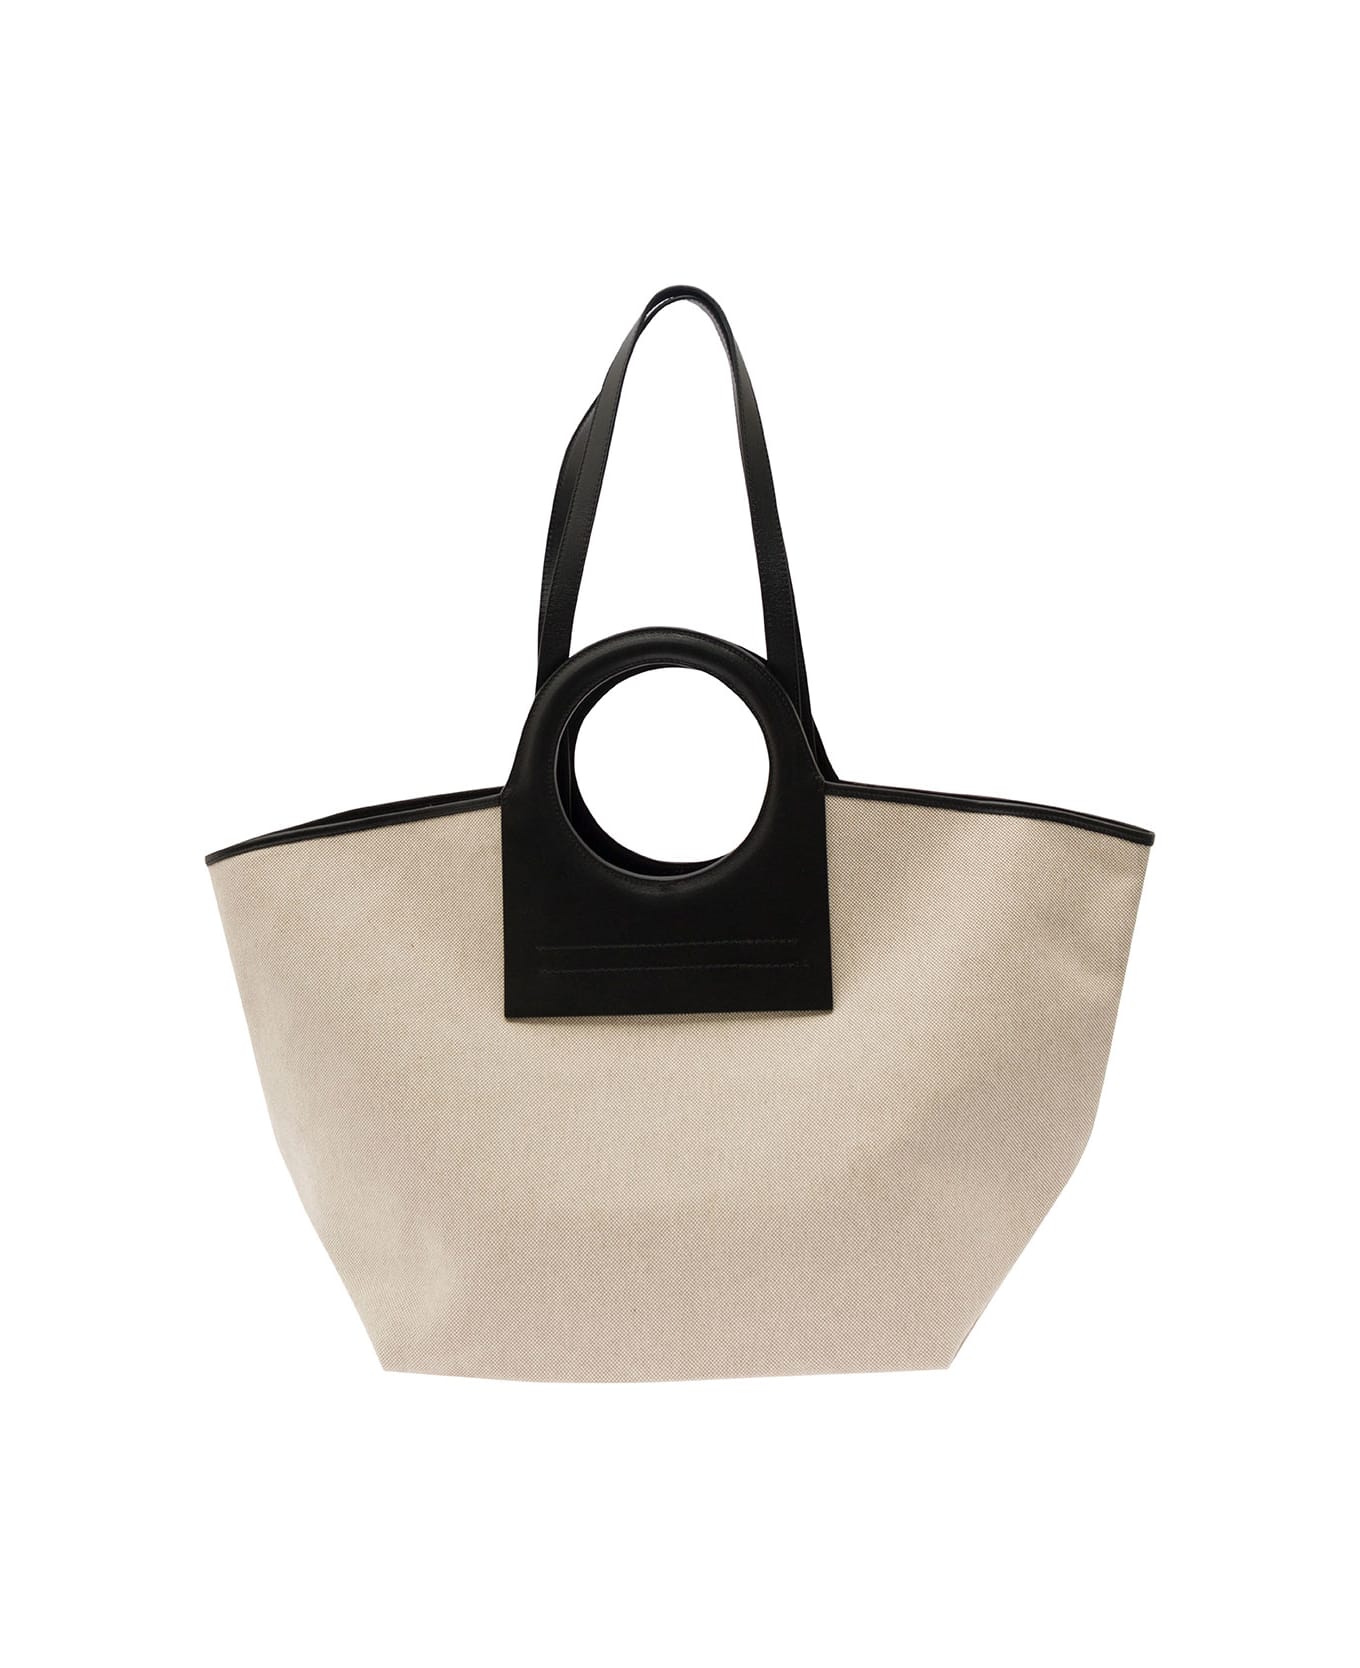 Hereu 'cala' White And Black Handbag With Leather Handles In Canvas Woman - Beige